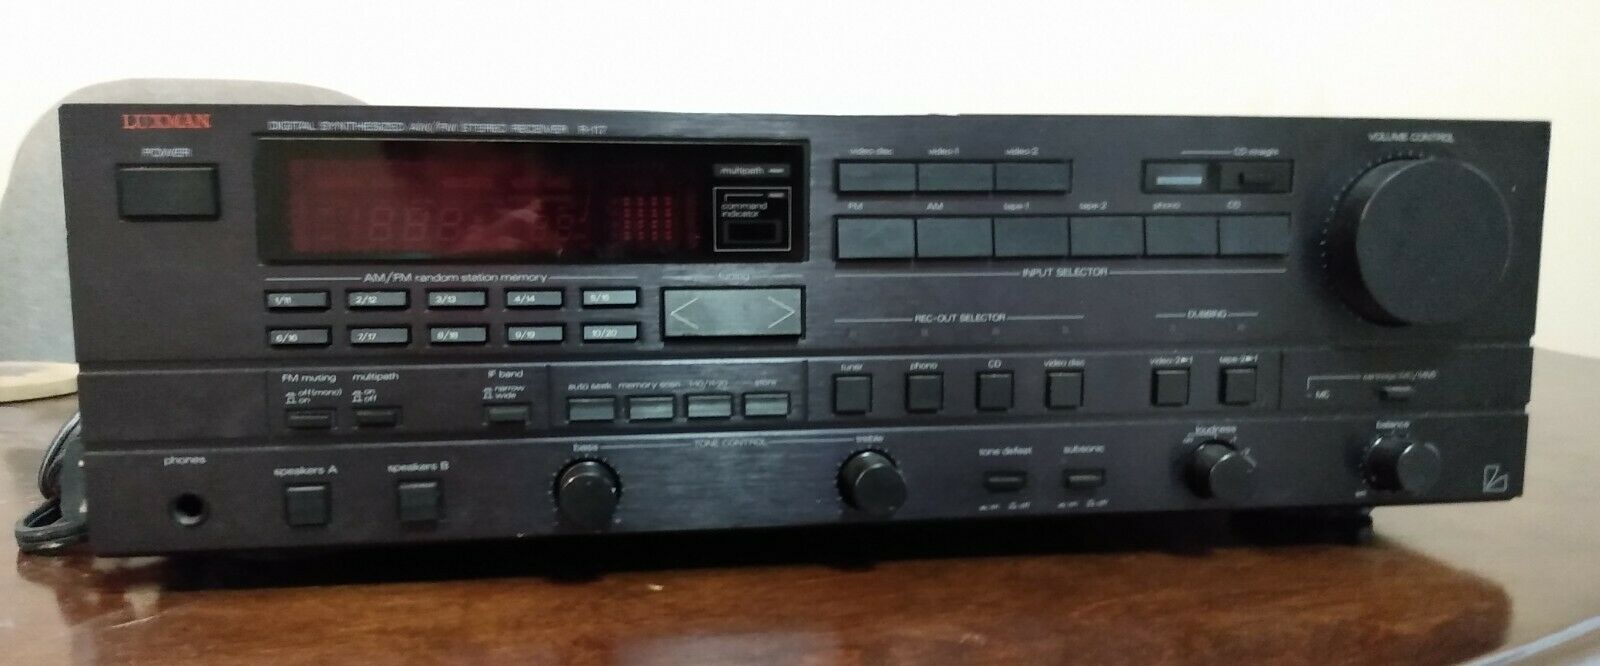 Luxman Stereo Receiver R-117